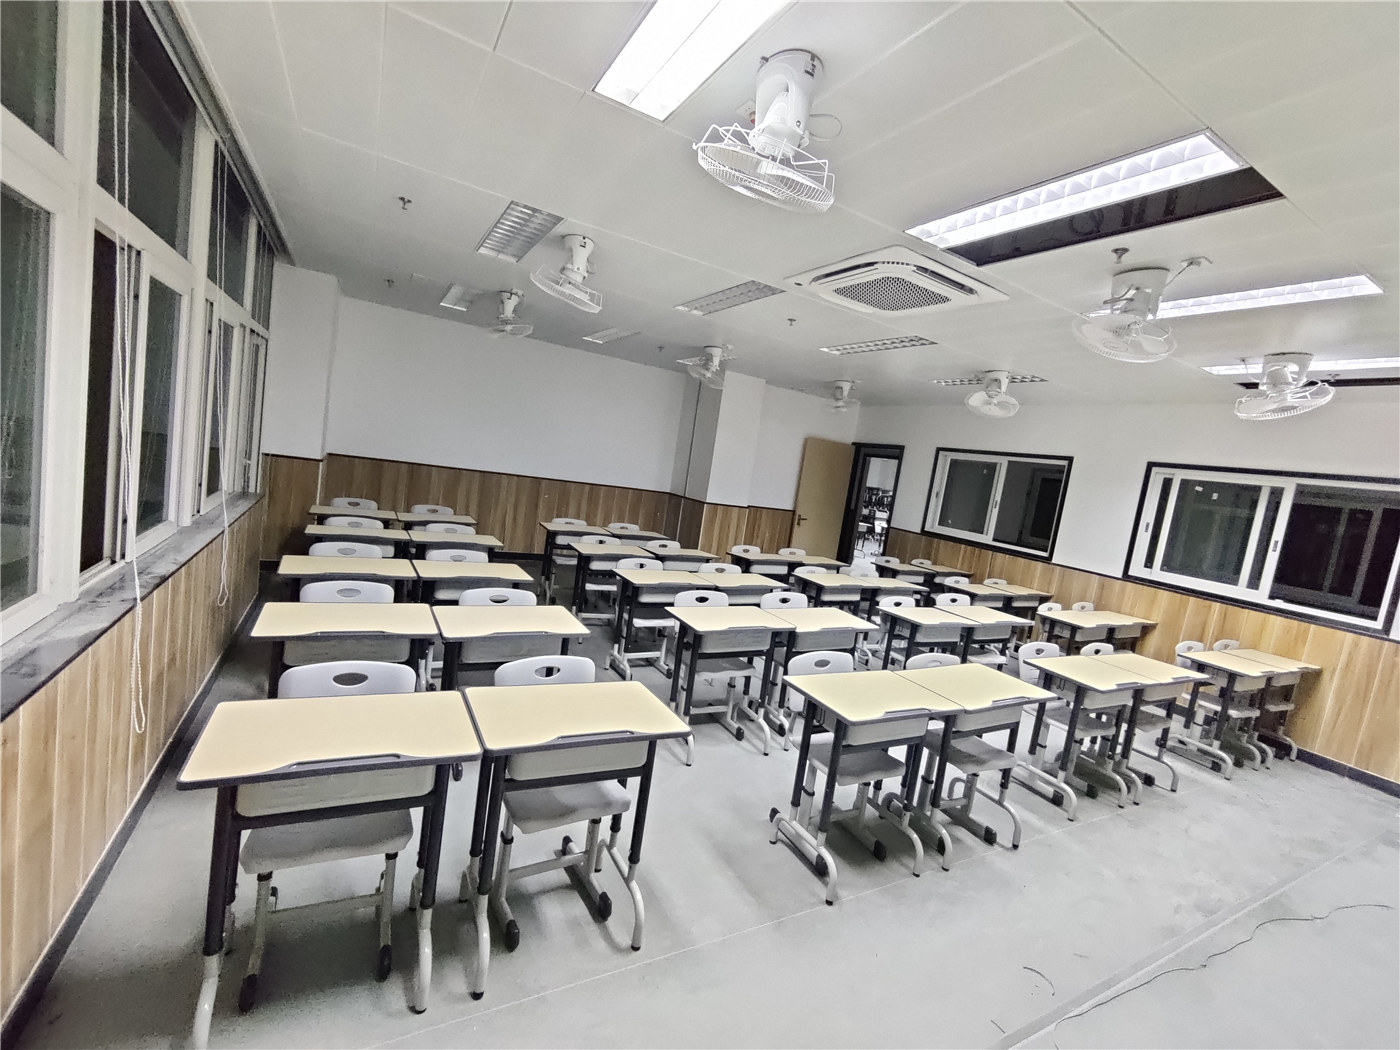 Use High-Quality Student Desks and Chairs to Maximize Classroom Efficiency101